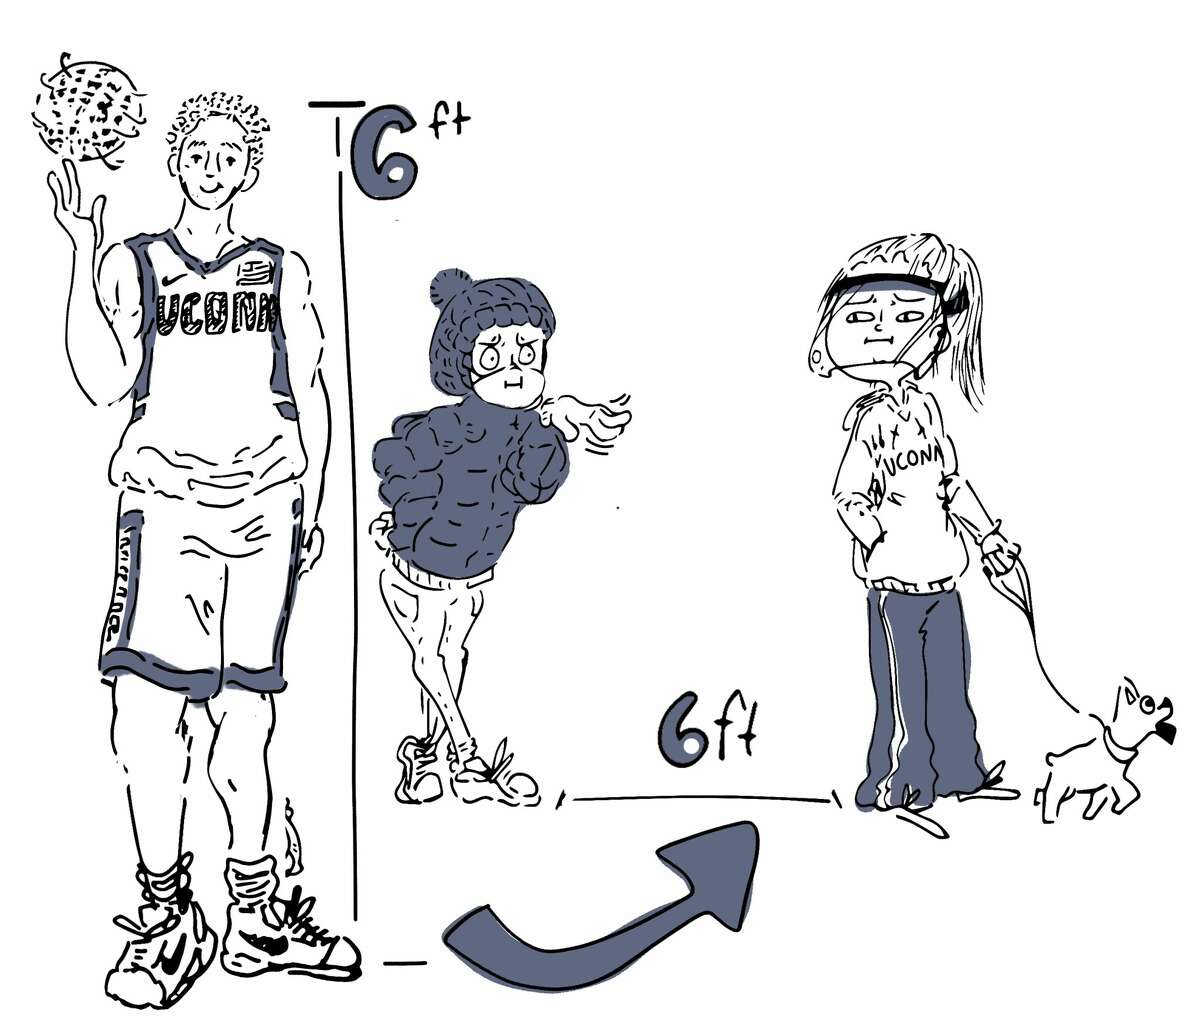 6 Feet: Used to mean someone's height, now means how far away you want people to stand from you.